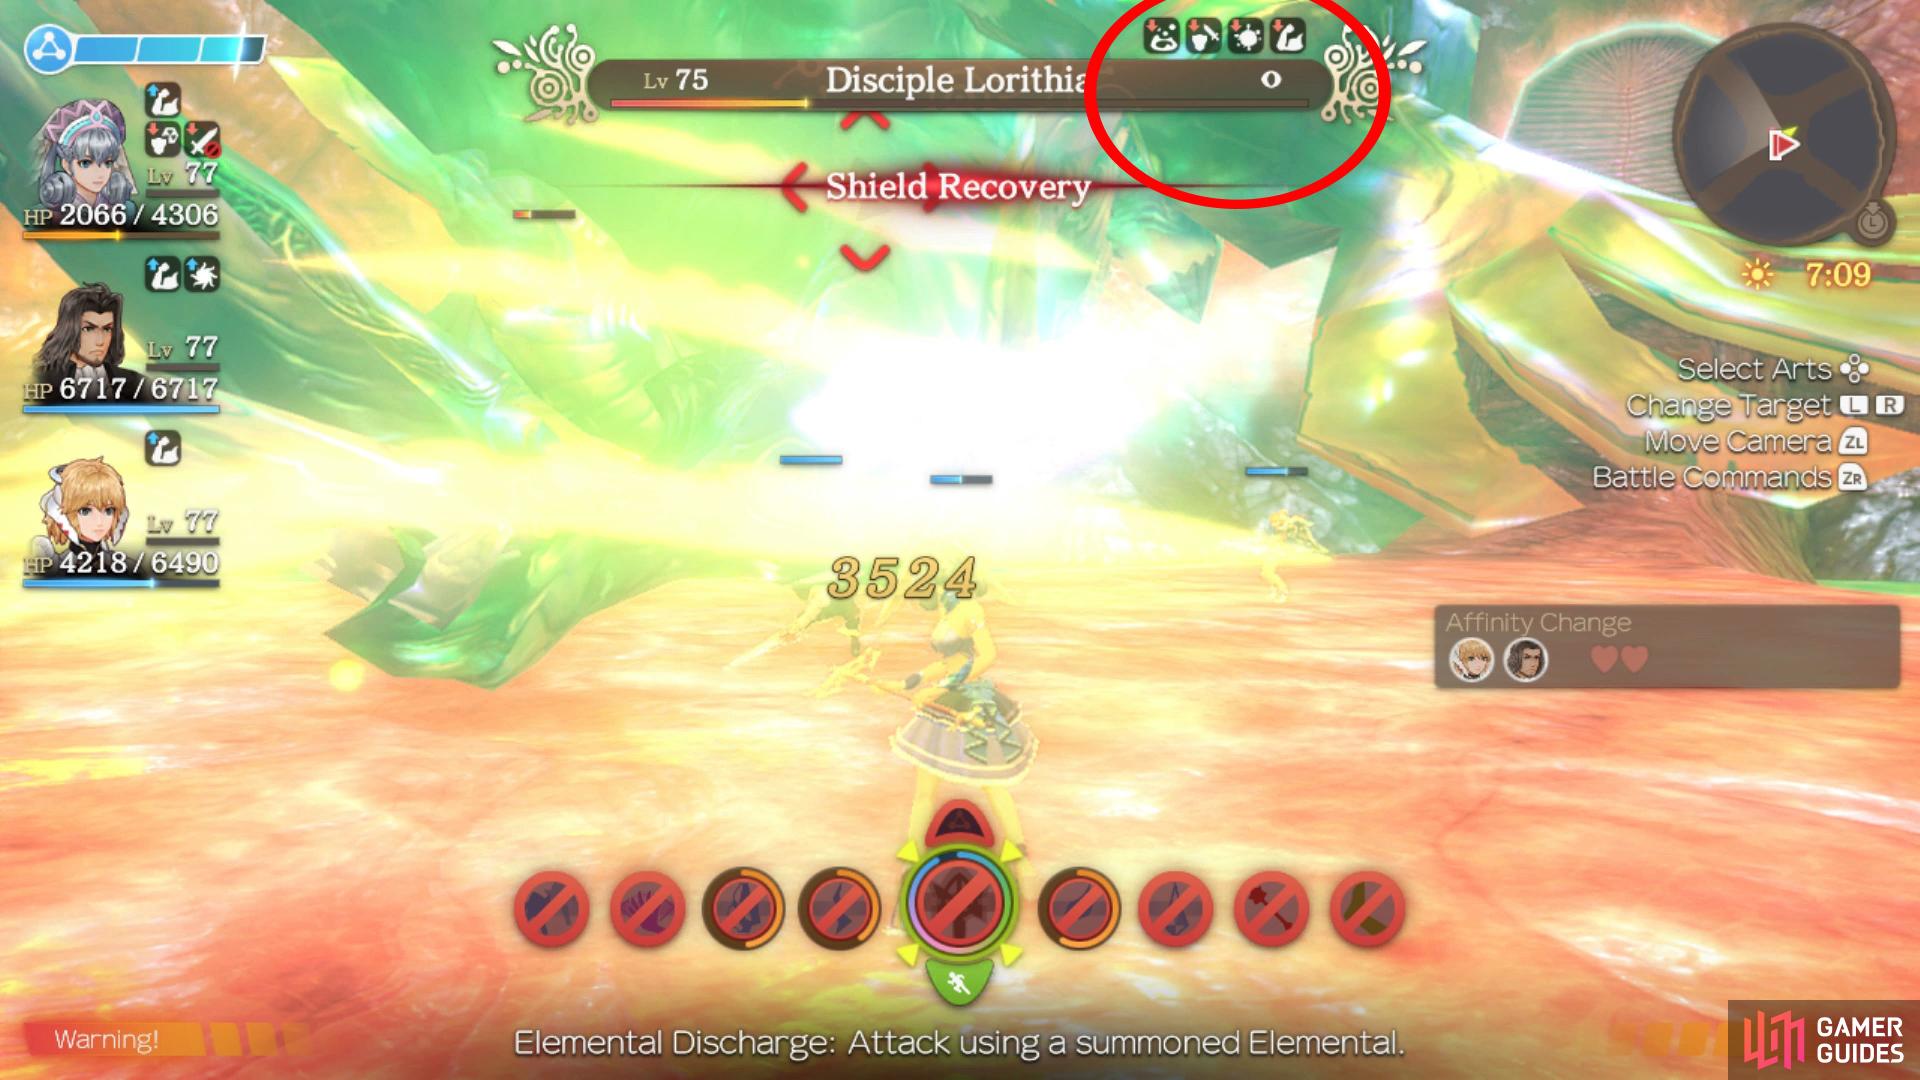 Lorithia will also use Shield Recovery to remove any Debuffs on her.